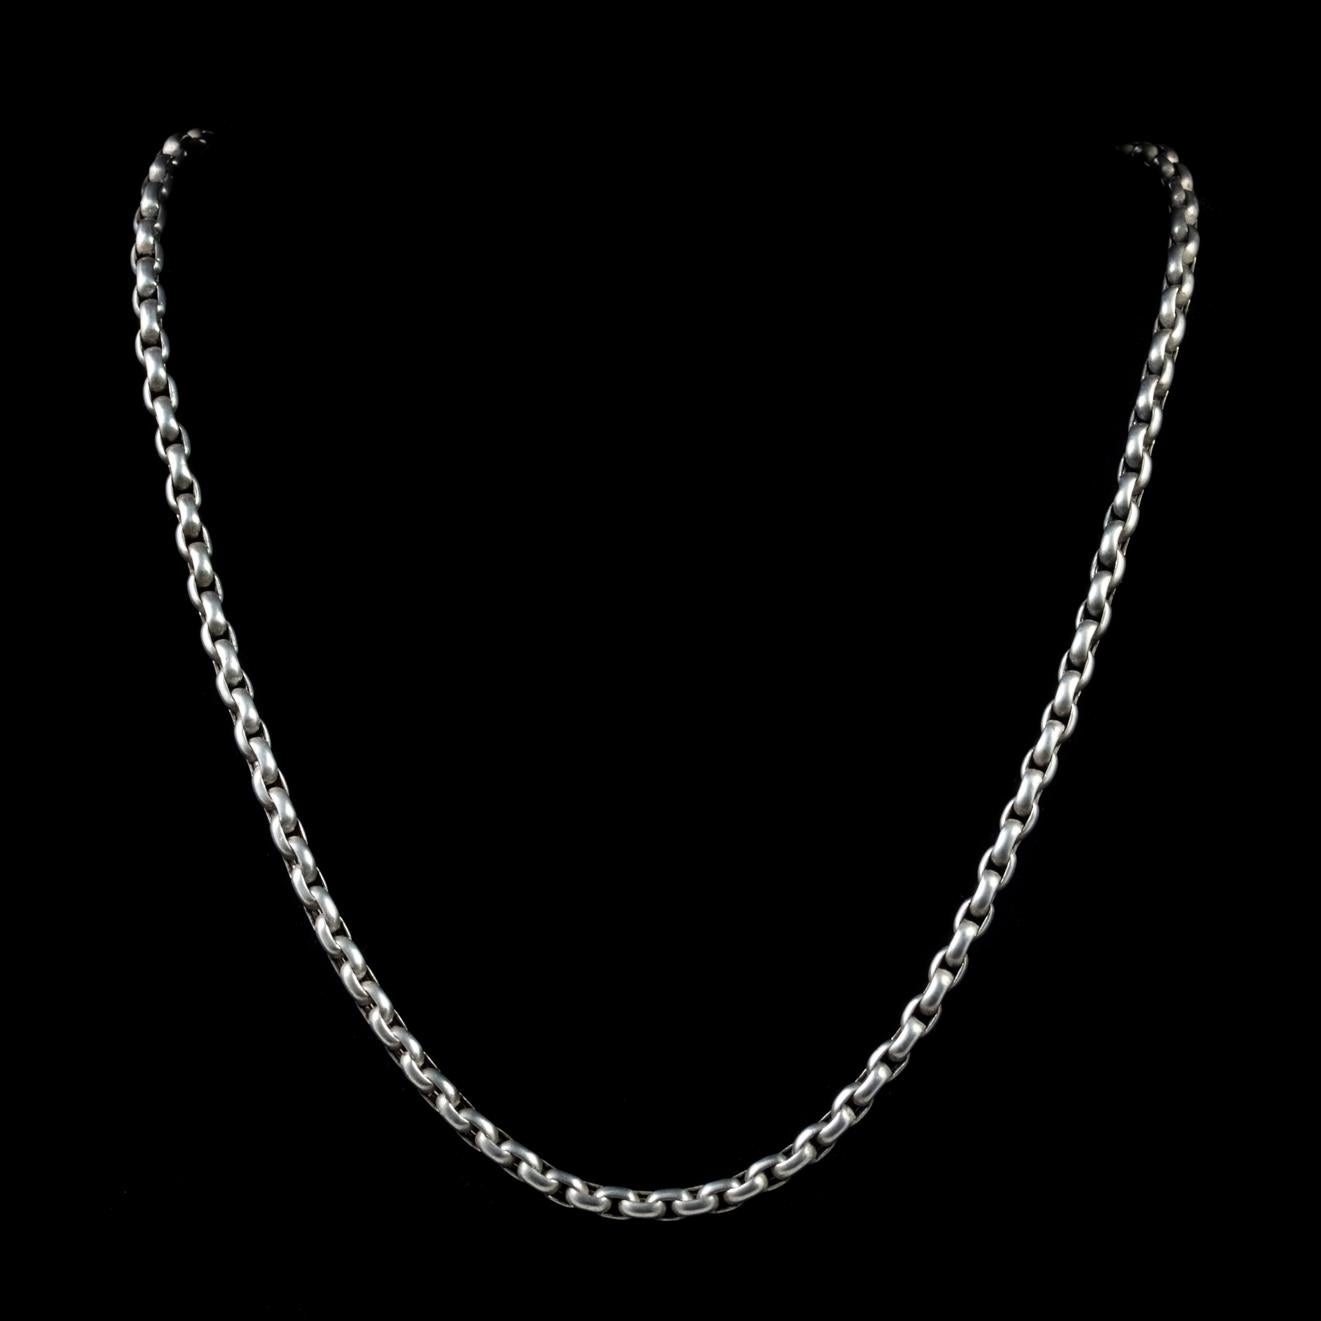 This long antique Belcher guard chain has been beautifully preserved from the Victorian era and is extremely robust made up of interconnecting Silver links. 

The chain has been expertly put together and has developed a lovely smoothness with age.